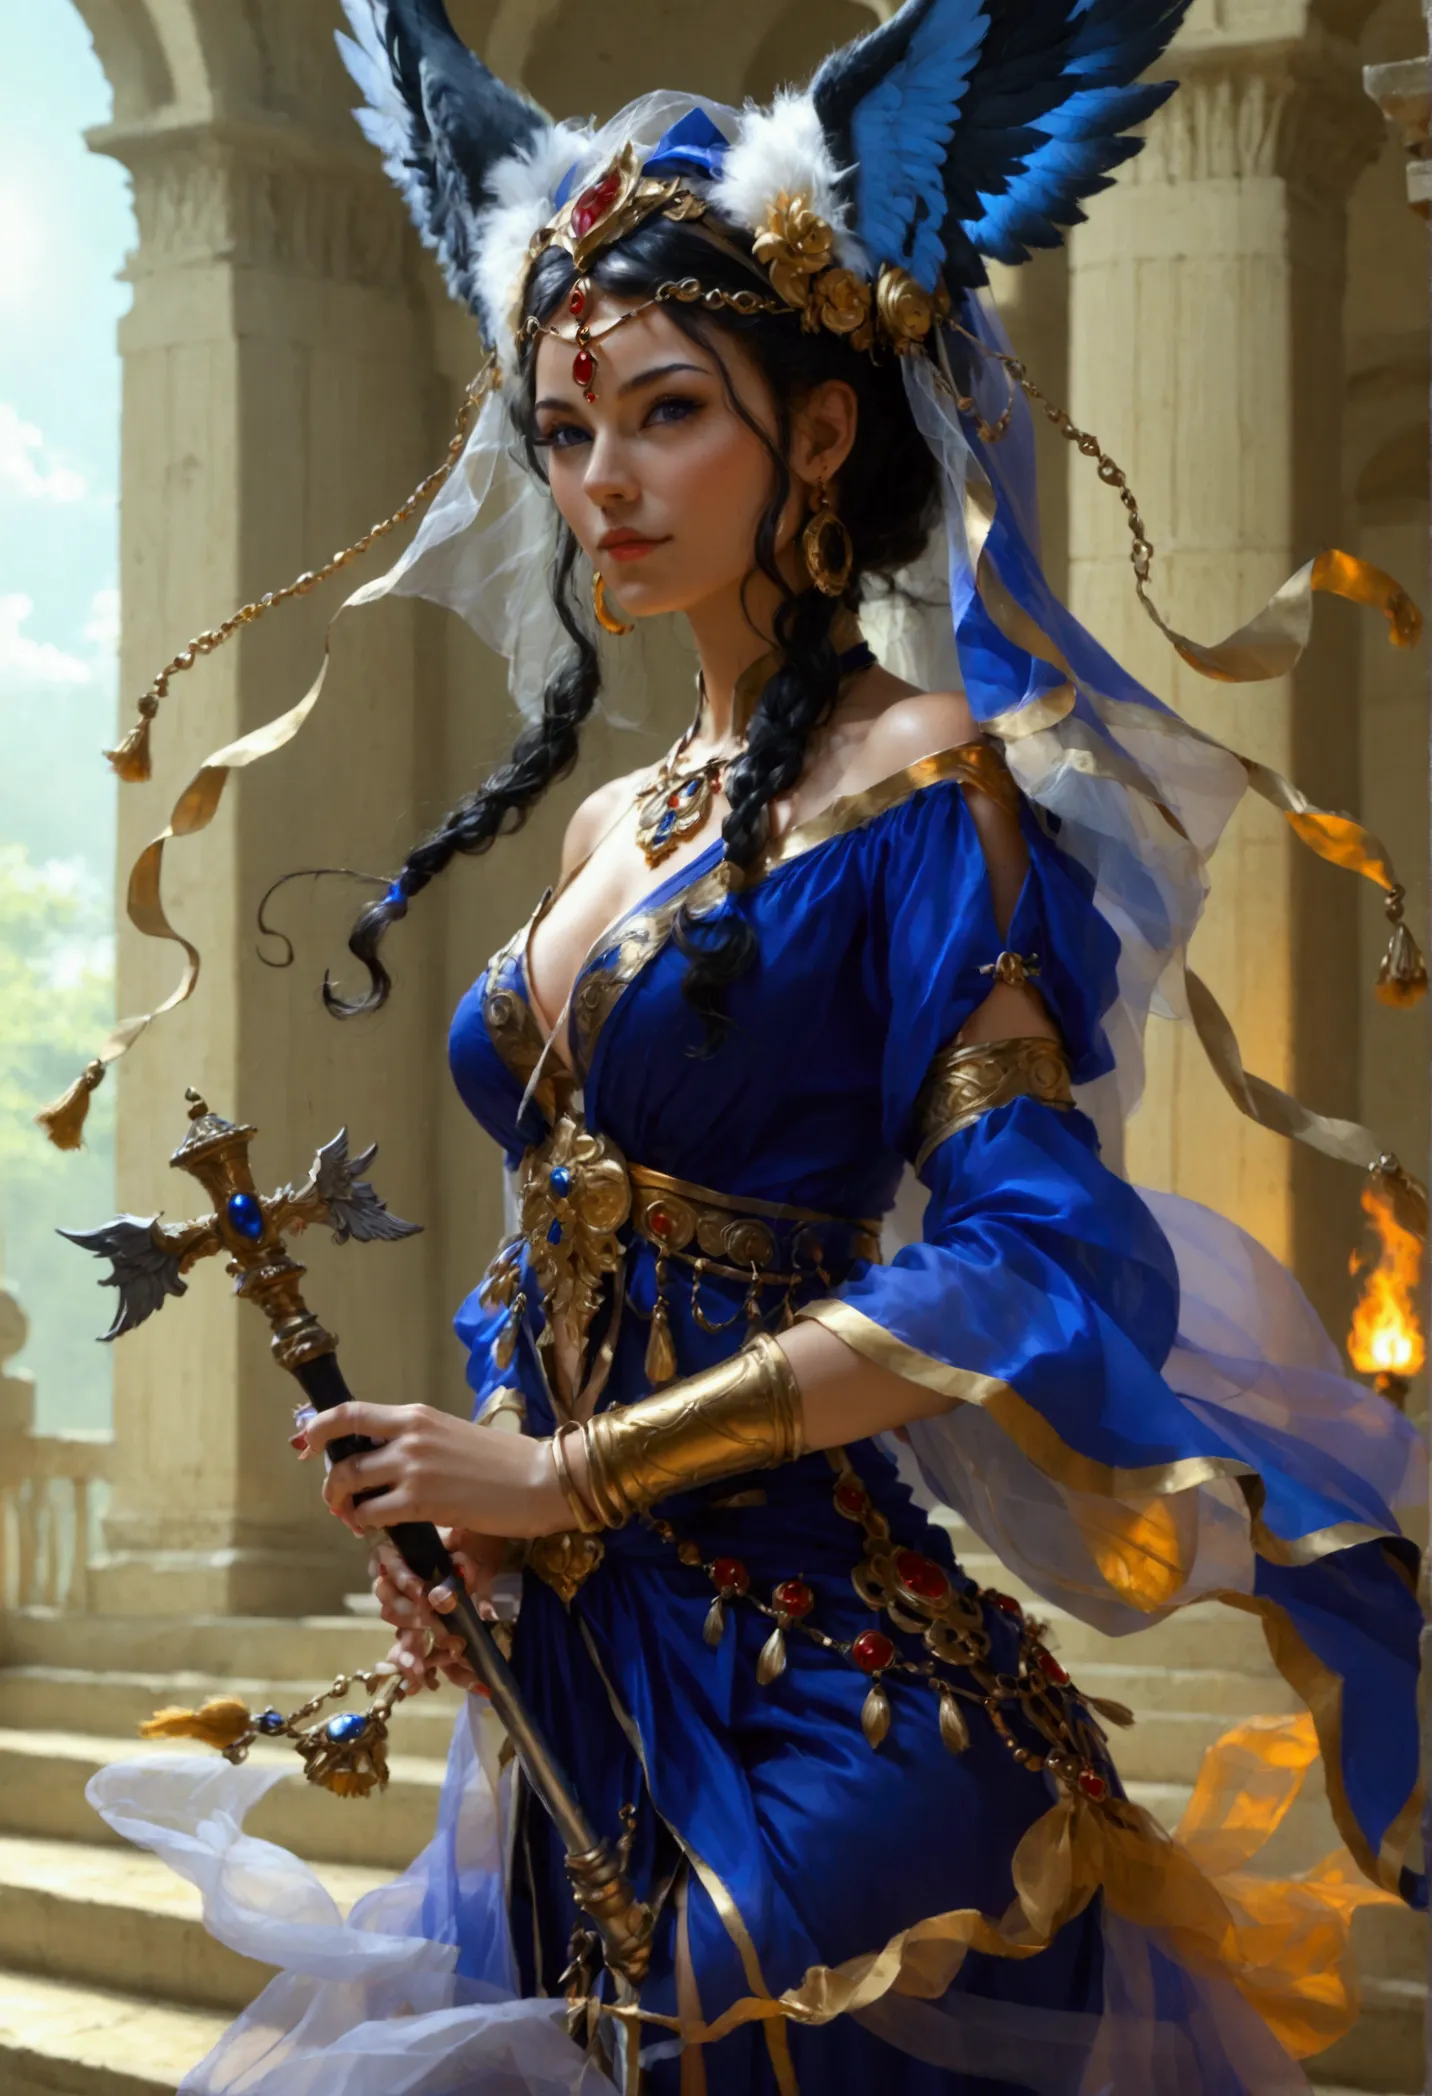 charachter: Hecate, Greek goddess, with their traditional costumes (long robe, veil, torch and dagger).
scenario: Open-air templ...